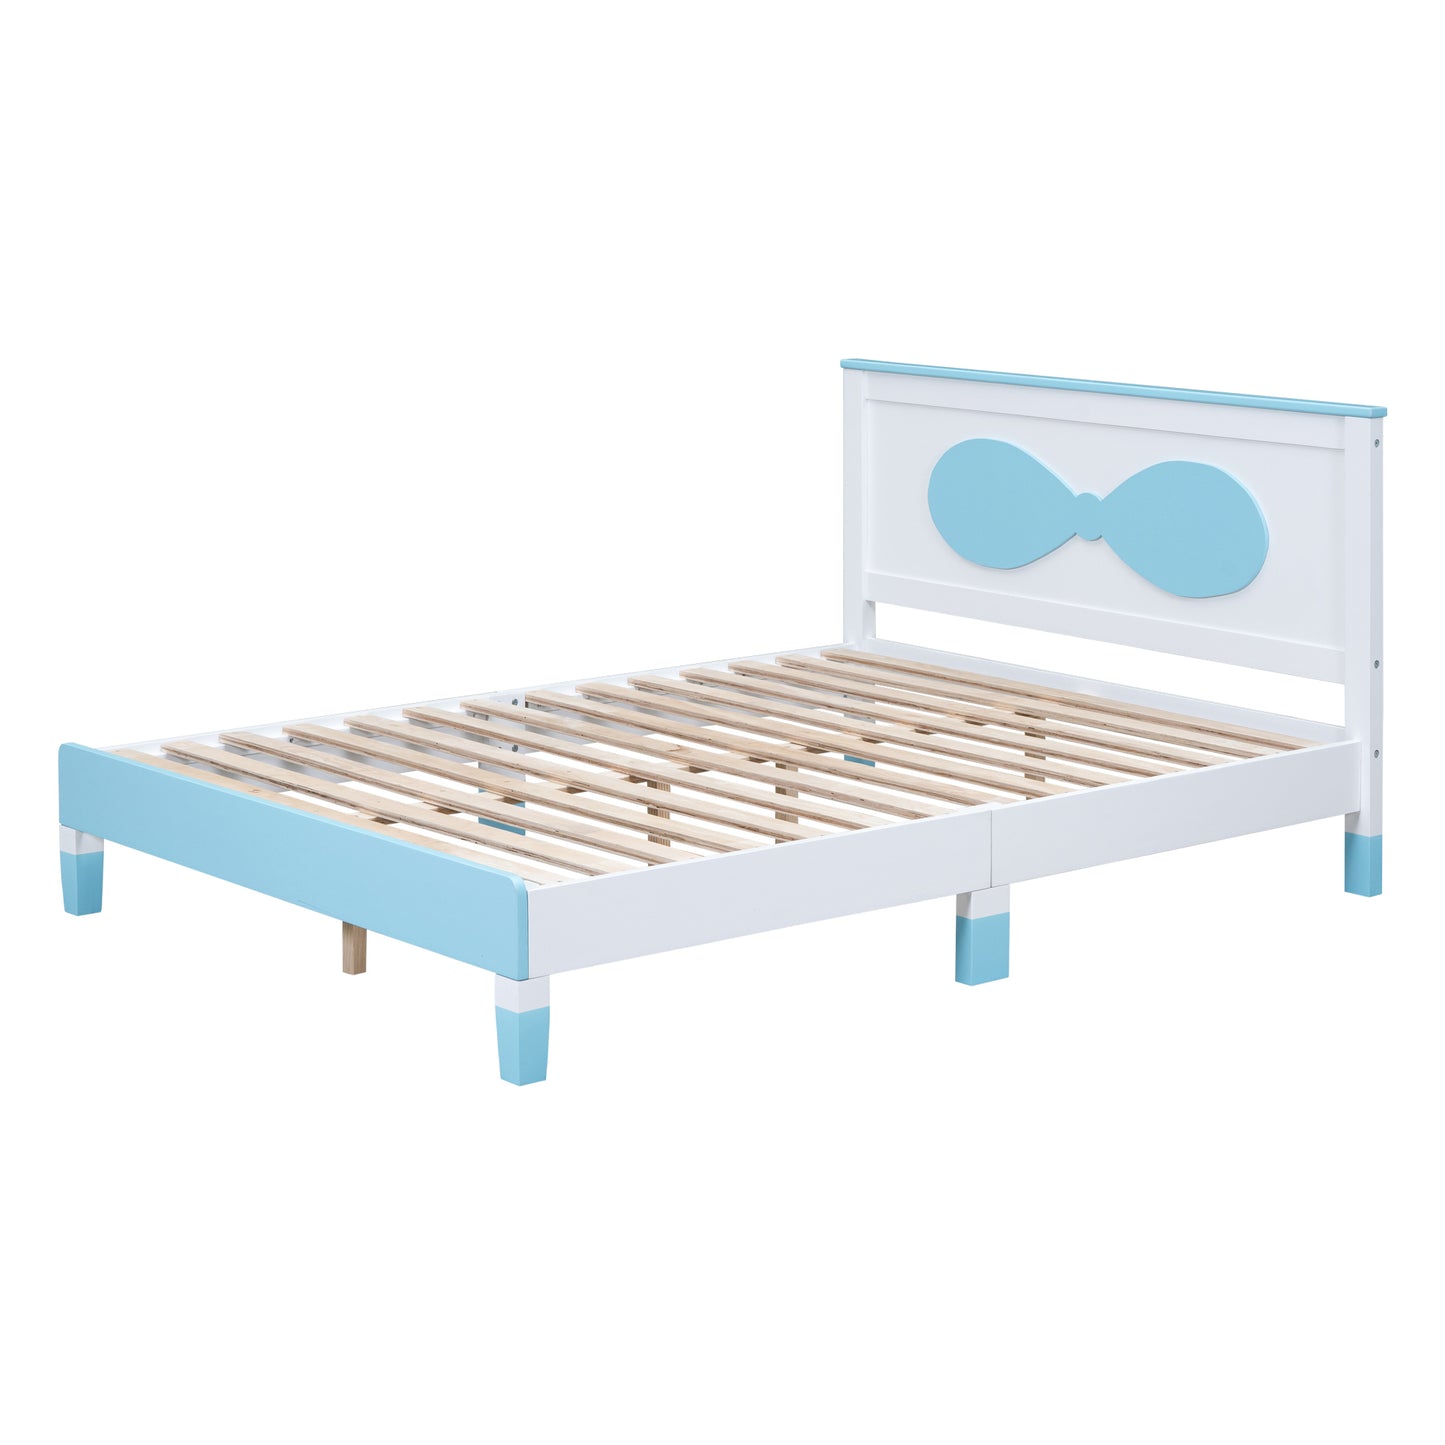 Full size Wooden Bow Bed